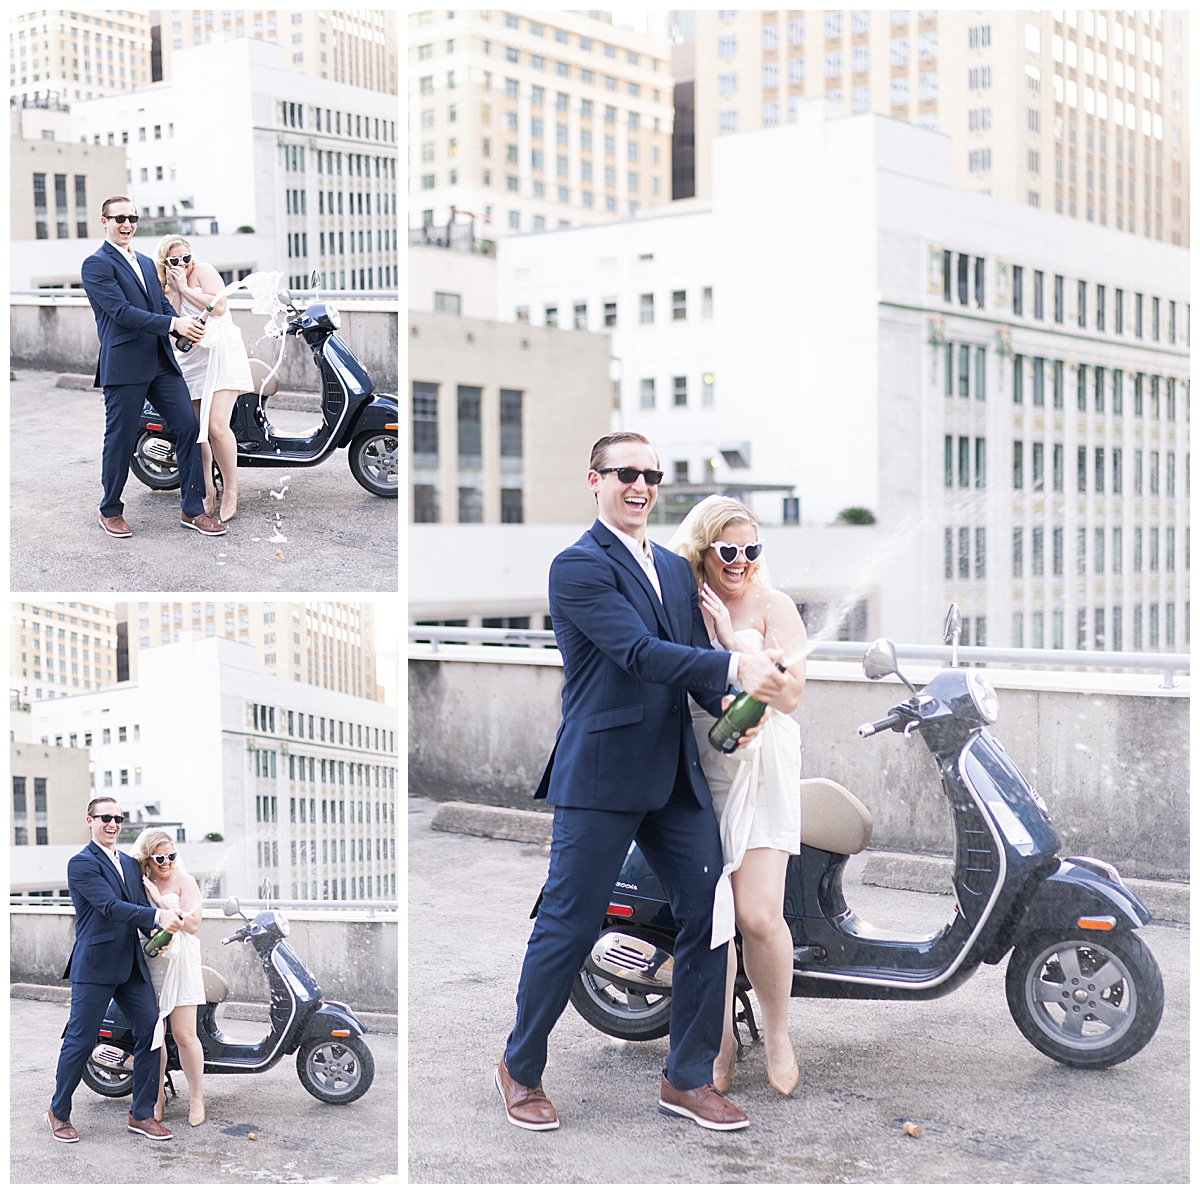 Couple enjoy Vespa for for their Modern Romantic Engagement Session